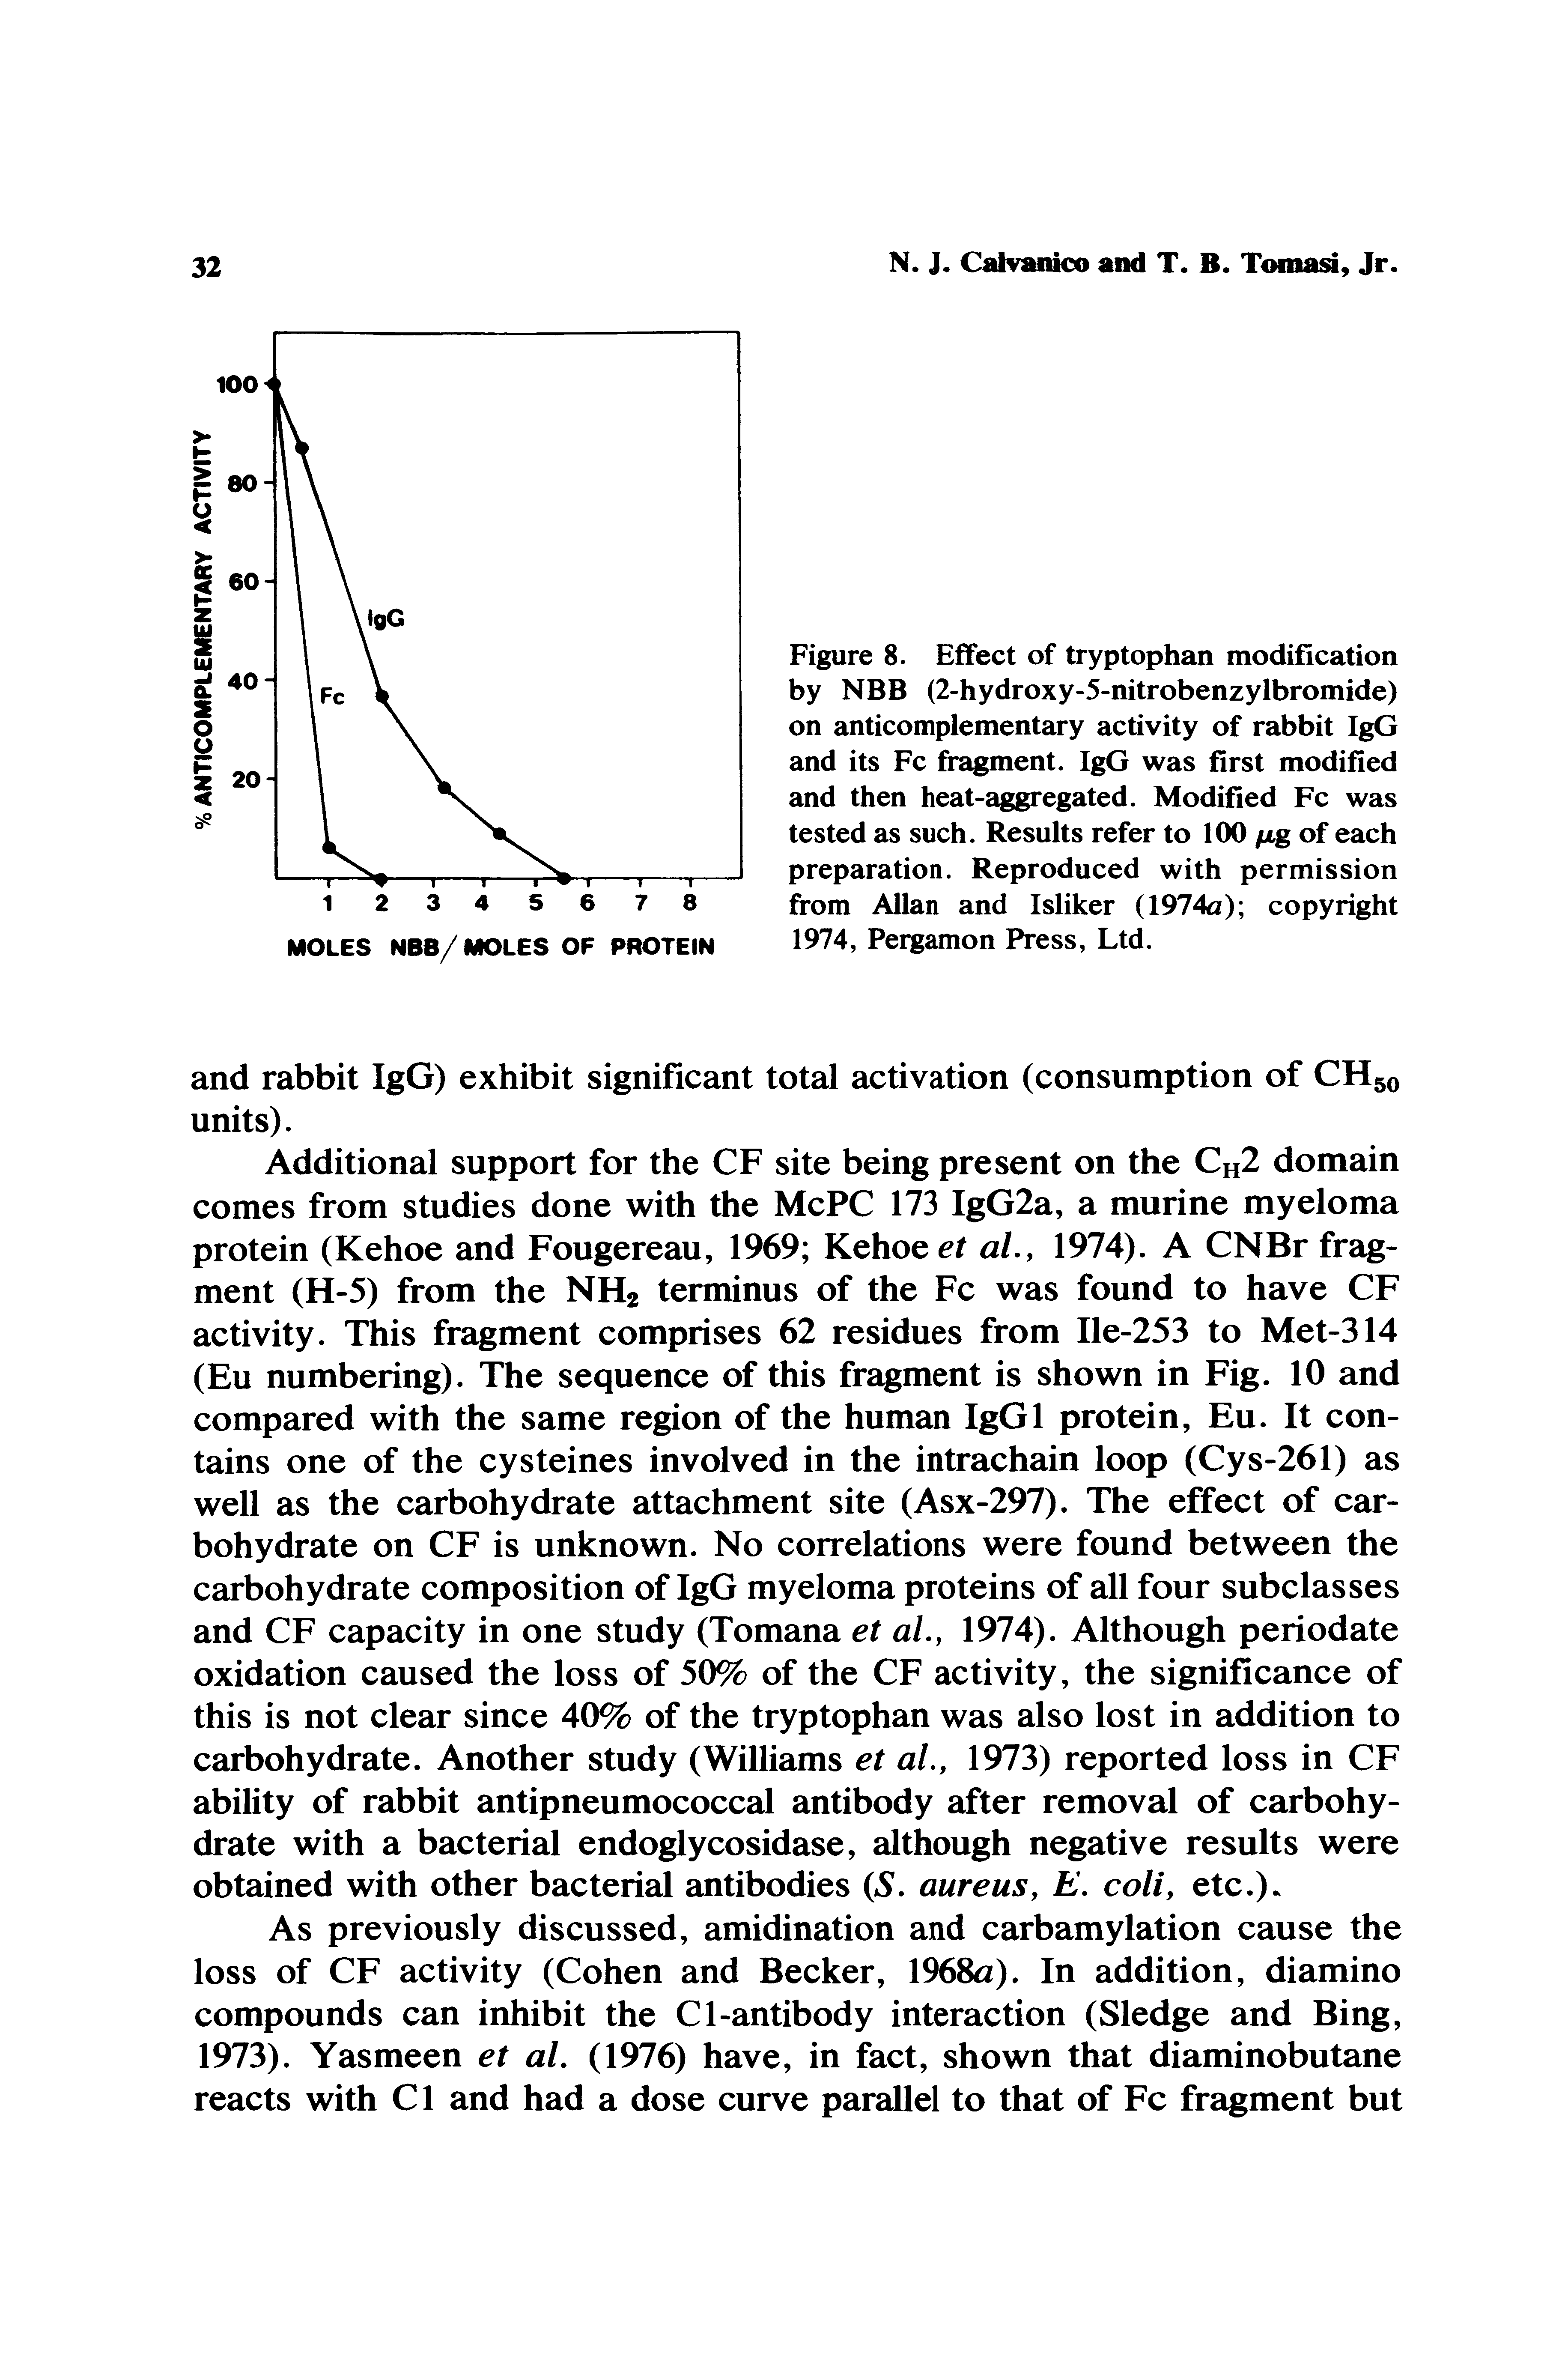 Figure 8. Effect of tryptophan modification by NBB (2-hydroxy-5-nitrobenzylbromide) on anticomplementary activity of rabbit IgG and its Fc fragment. IgG was first modified and then heat-aggregated. Modified Fc was tested as such. Results refer to 100 /i,g of each preparation. Reproduced with permission from Allan and Isliker (1974a) copyright 1974, Peigamon Press, Ltd.